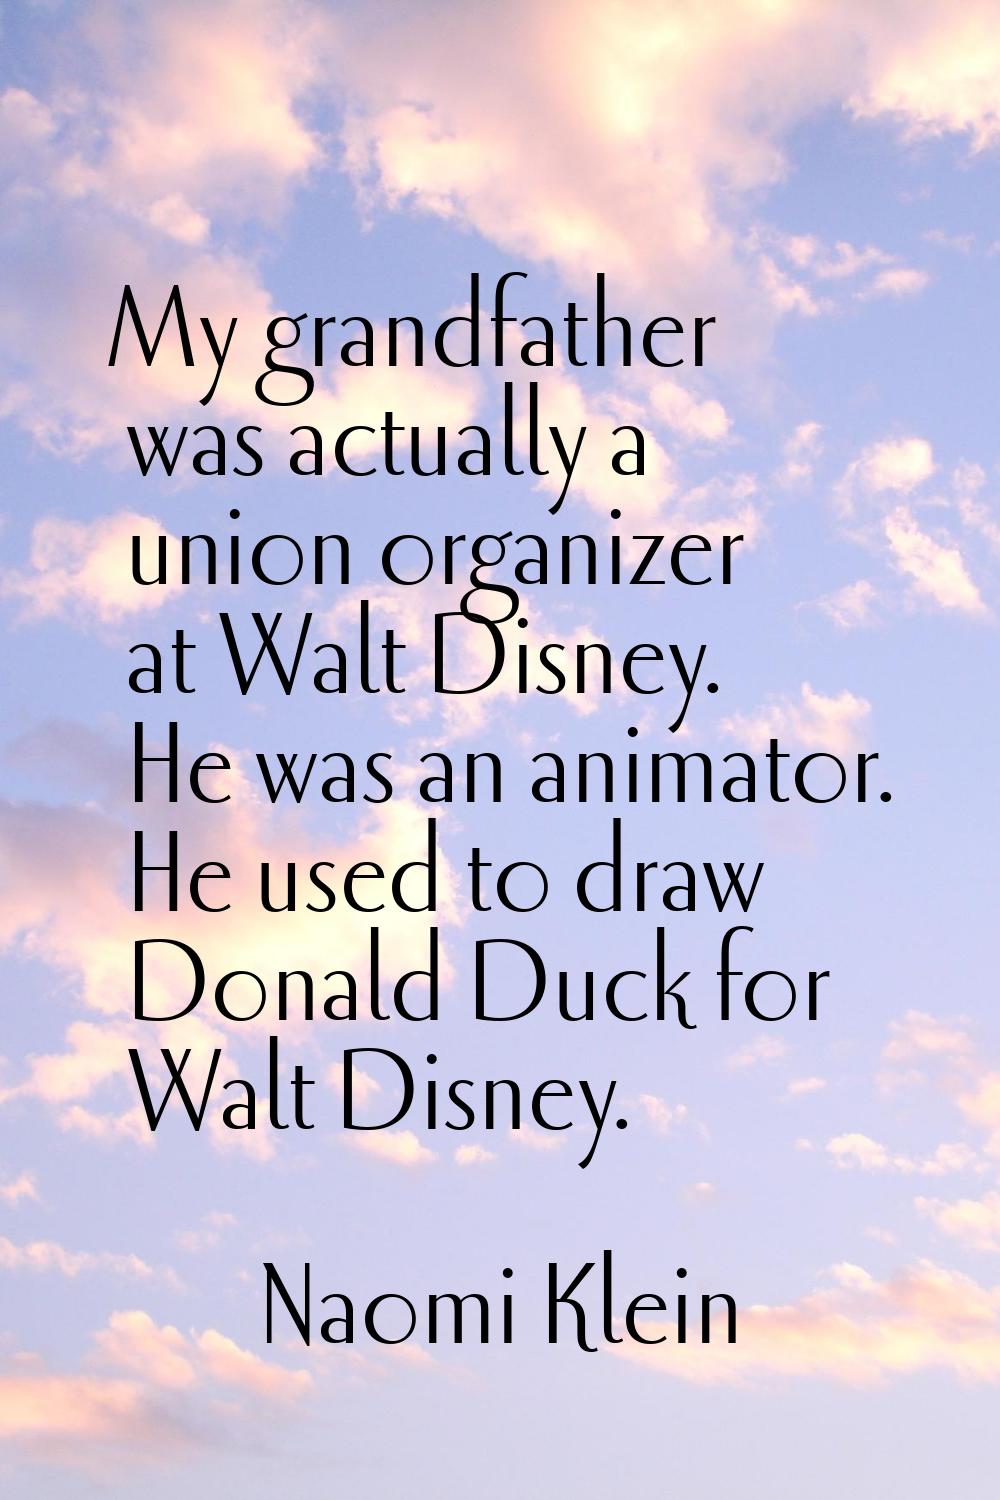 My grandfather was actually a union organizer at Walt Disney. He was an animator. He used to draw D